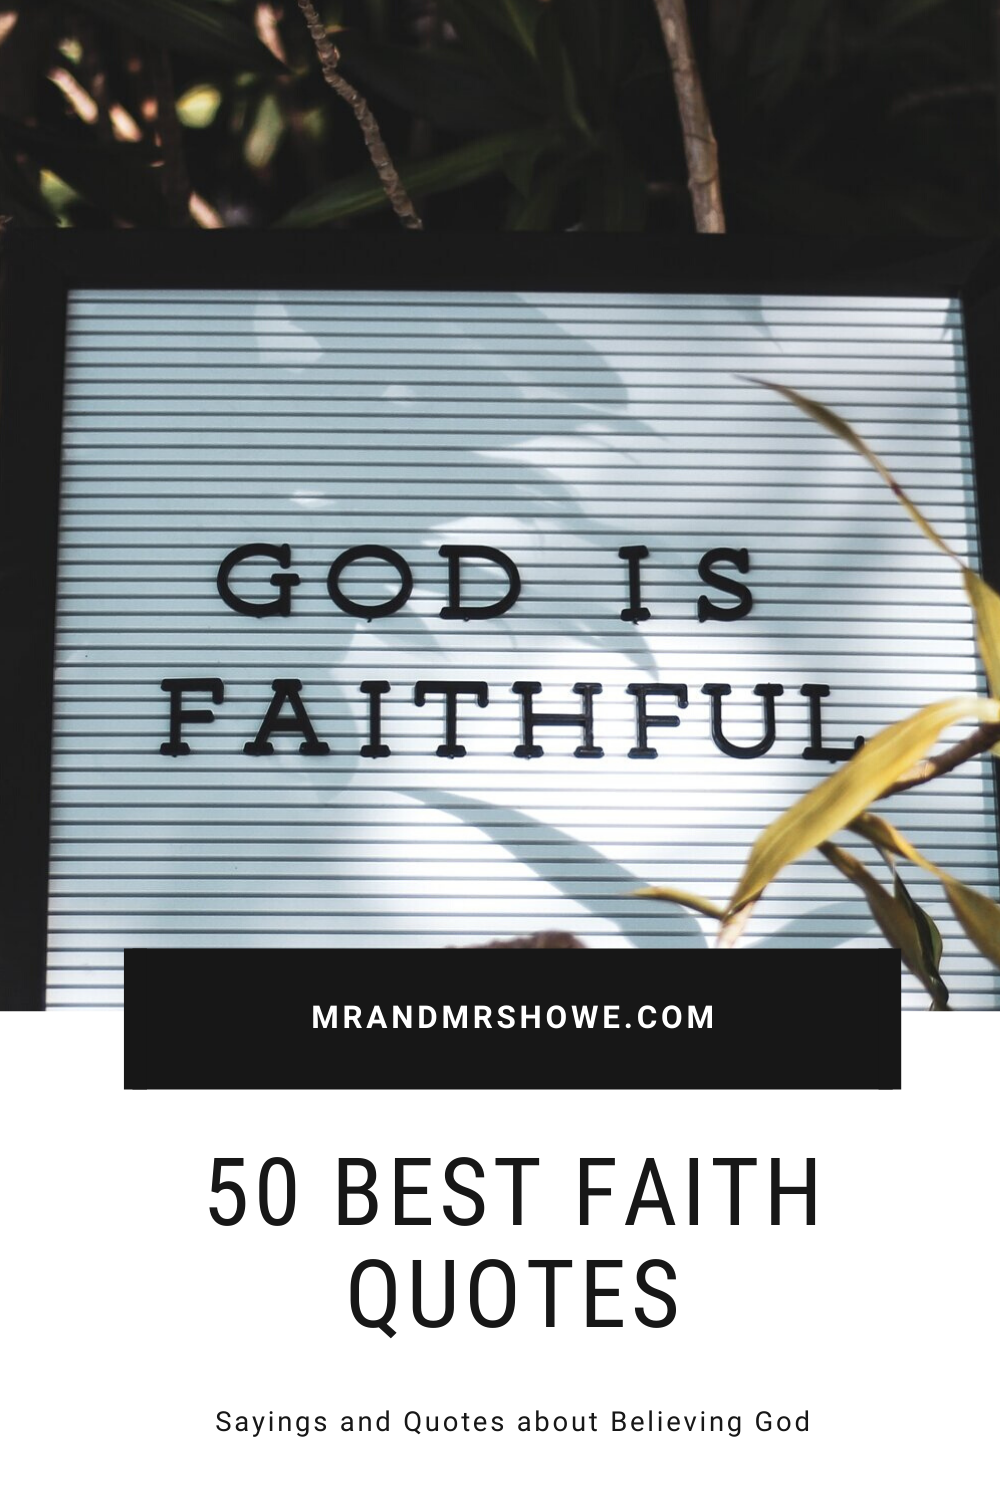 50 Best Faith Quotes to Inspire You.png